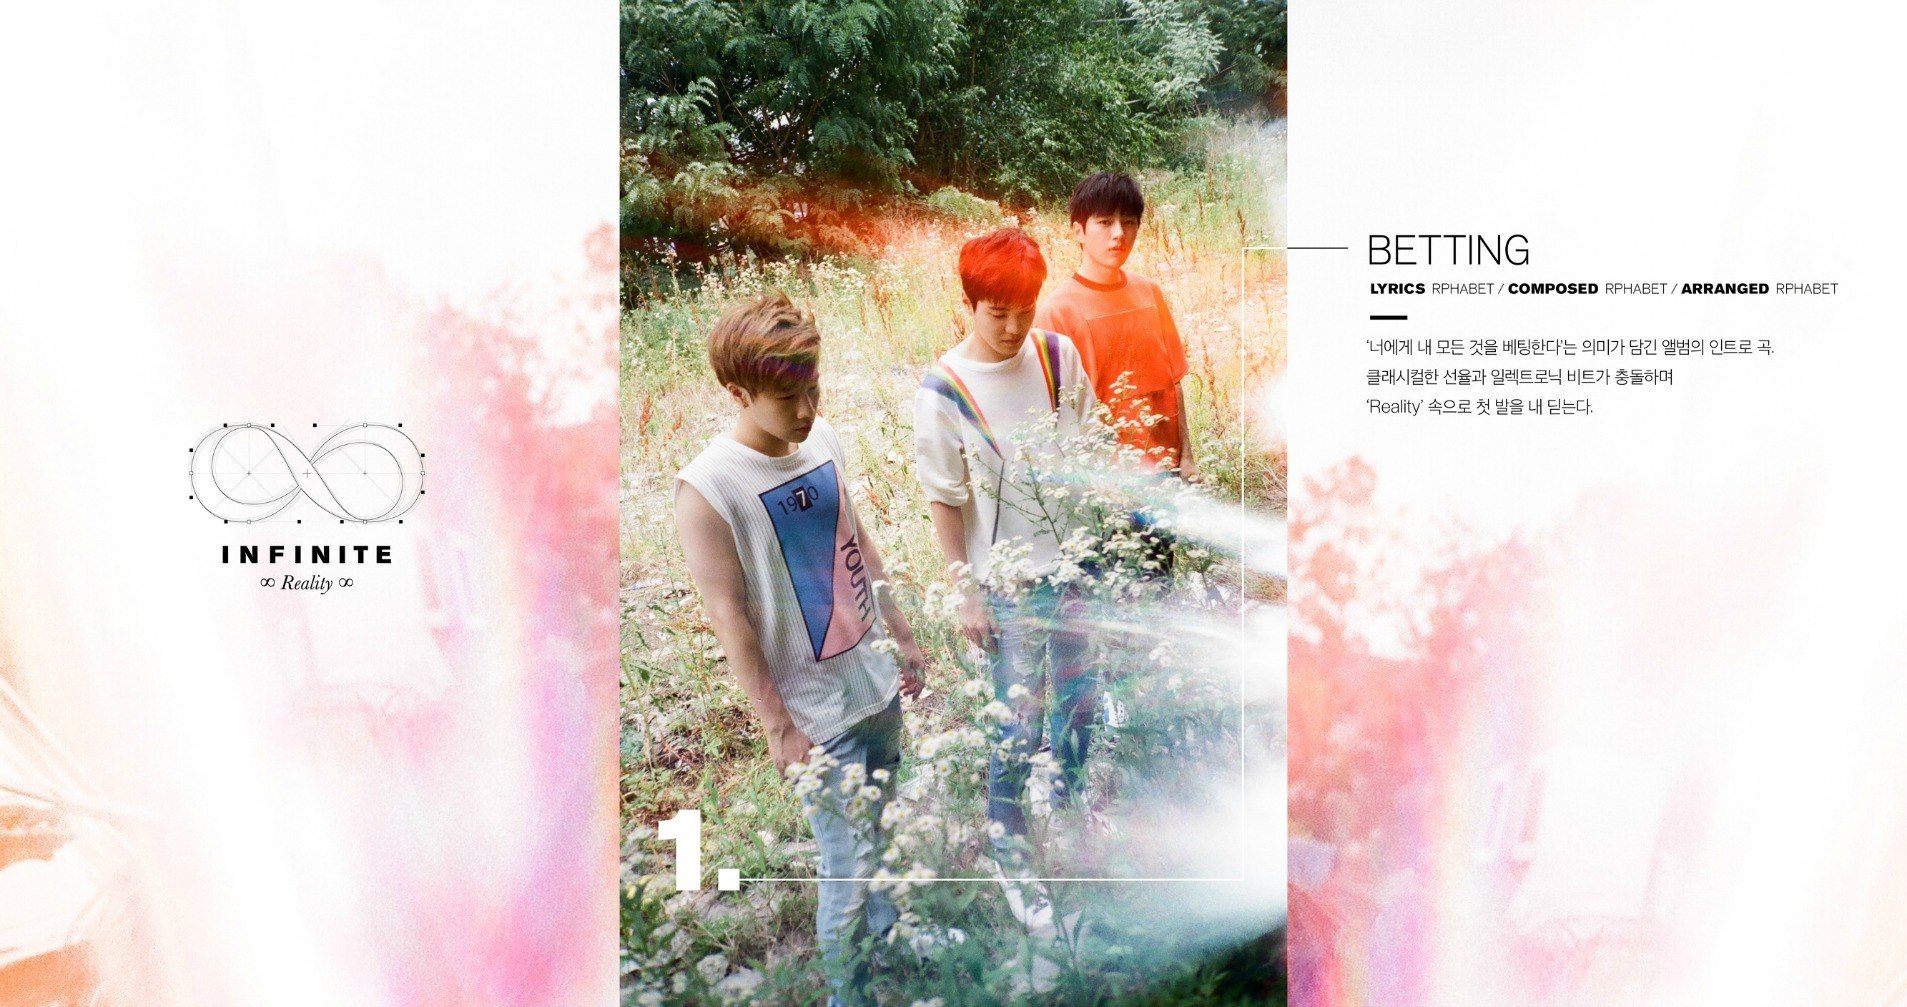 After INFINITE officially released the first image teaser for their 